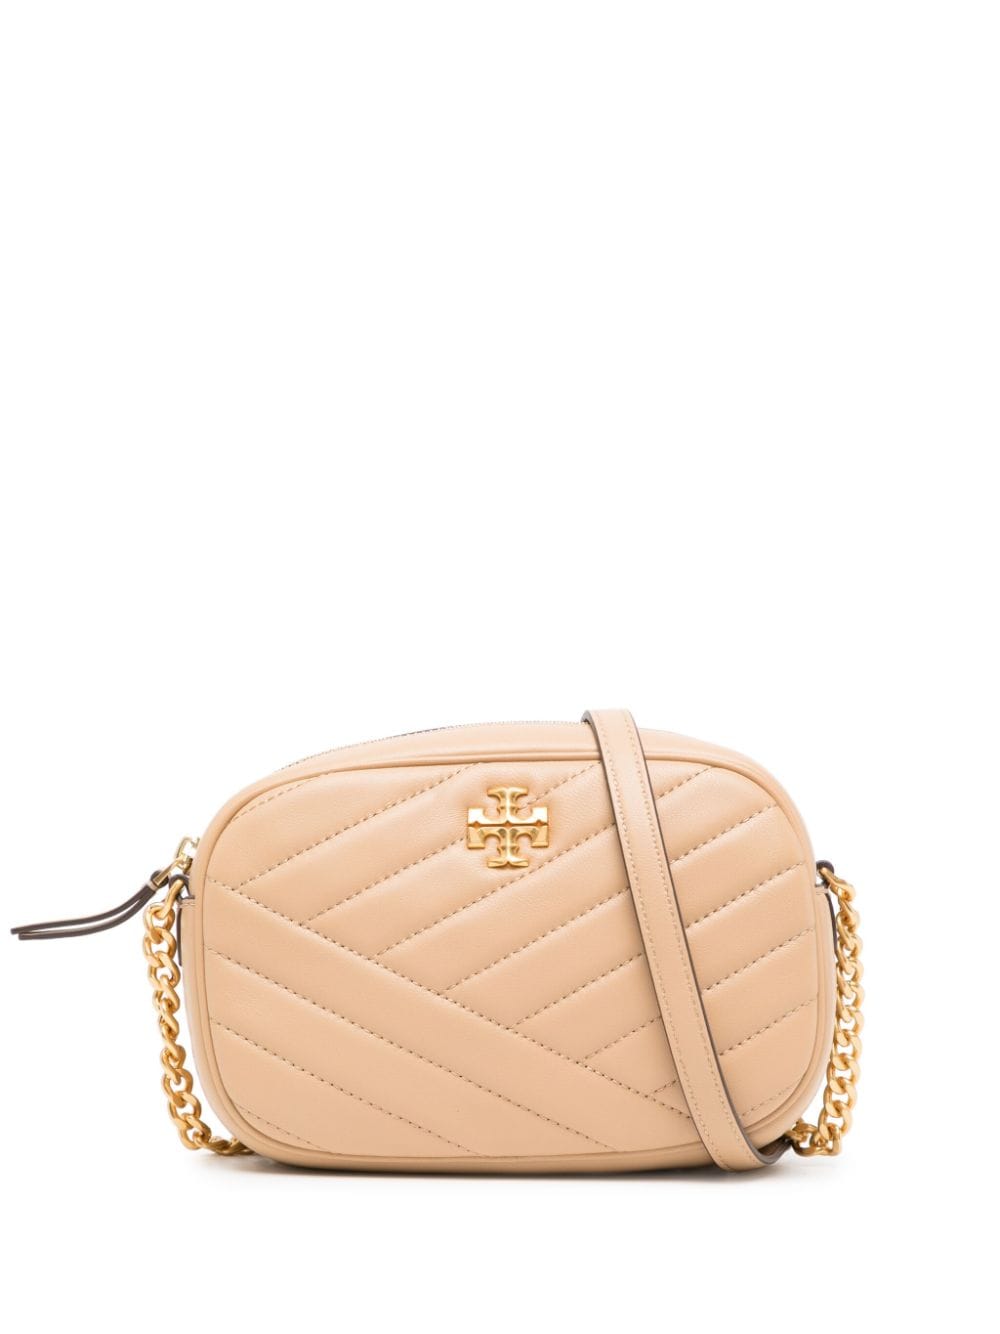 Buy Tory Burch Kira Quilted Camera Bag with Adjustable Crossbody